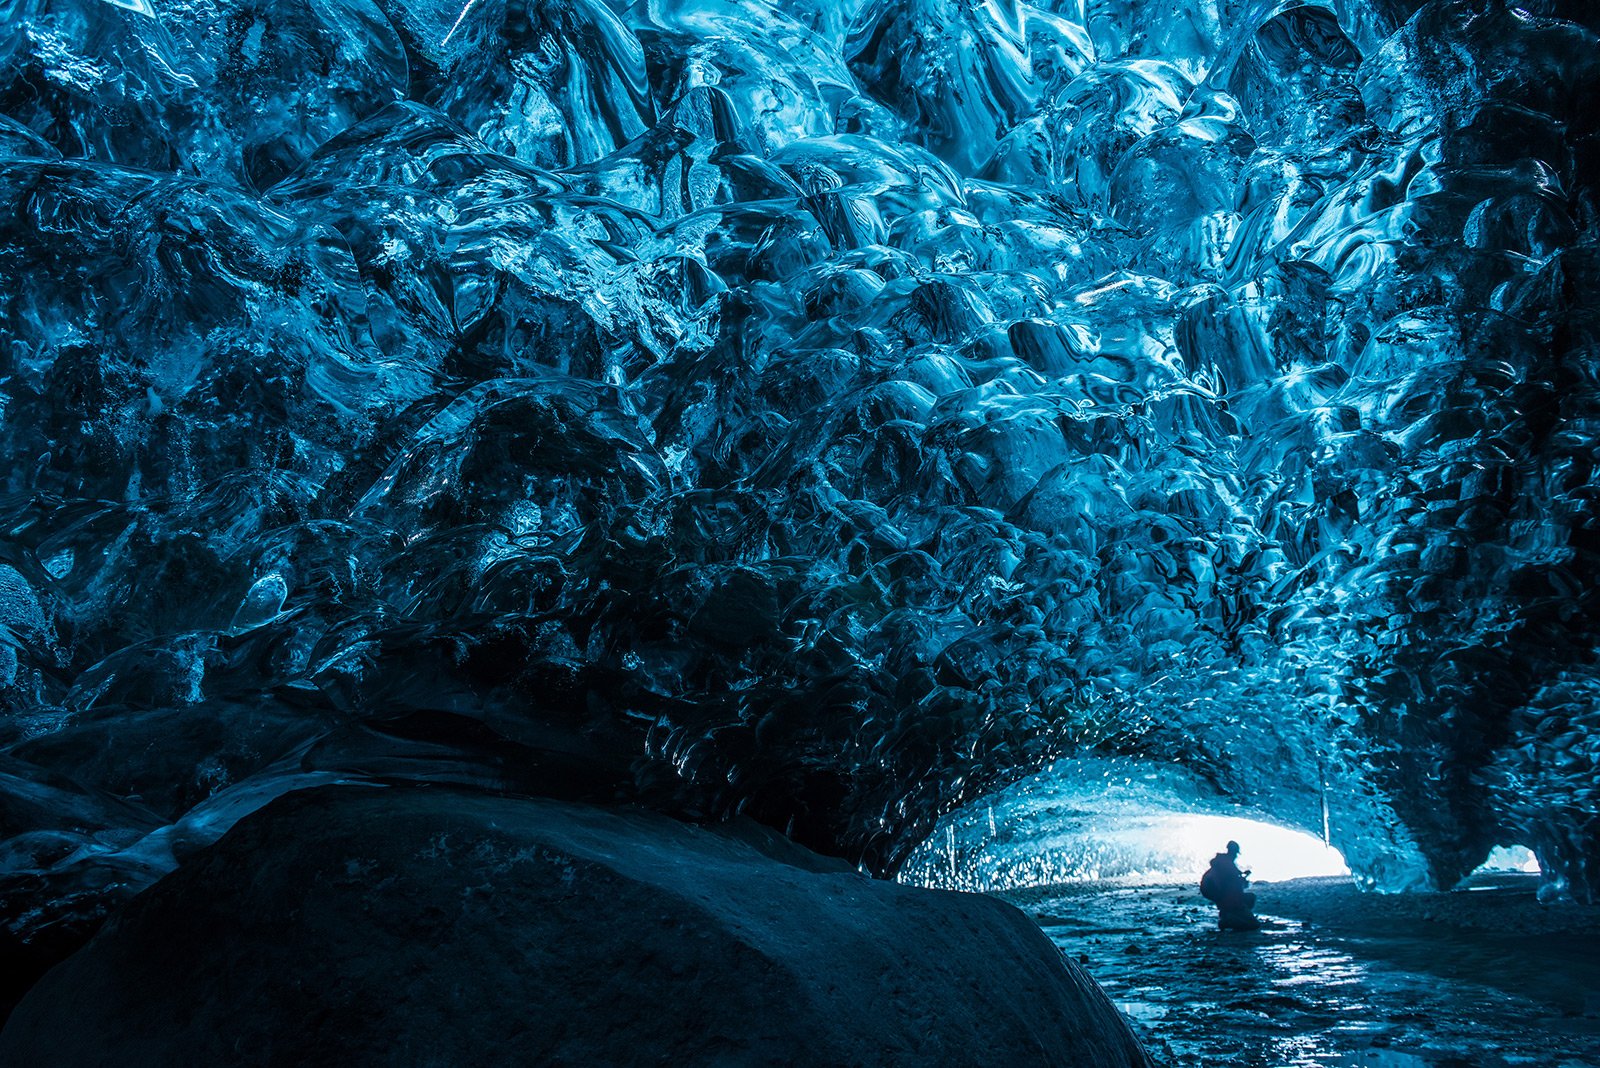 How to see ice caves in Reykjavik